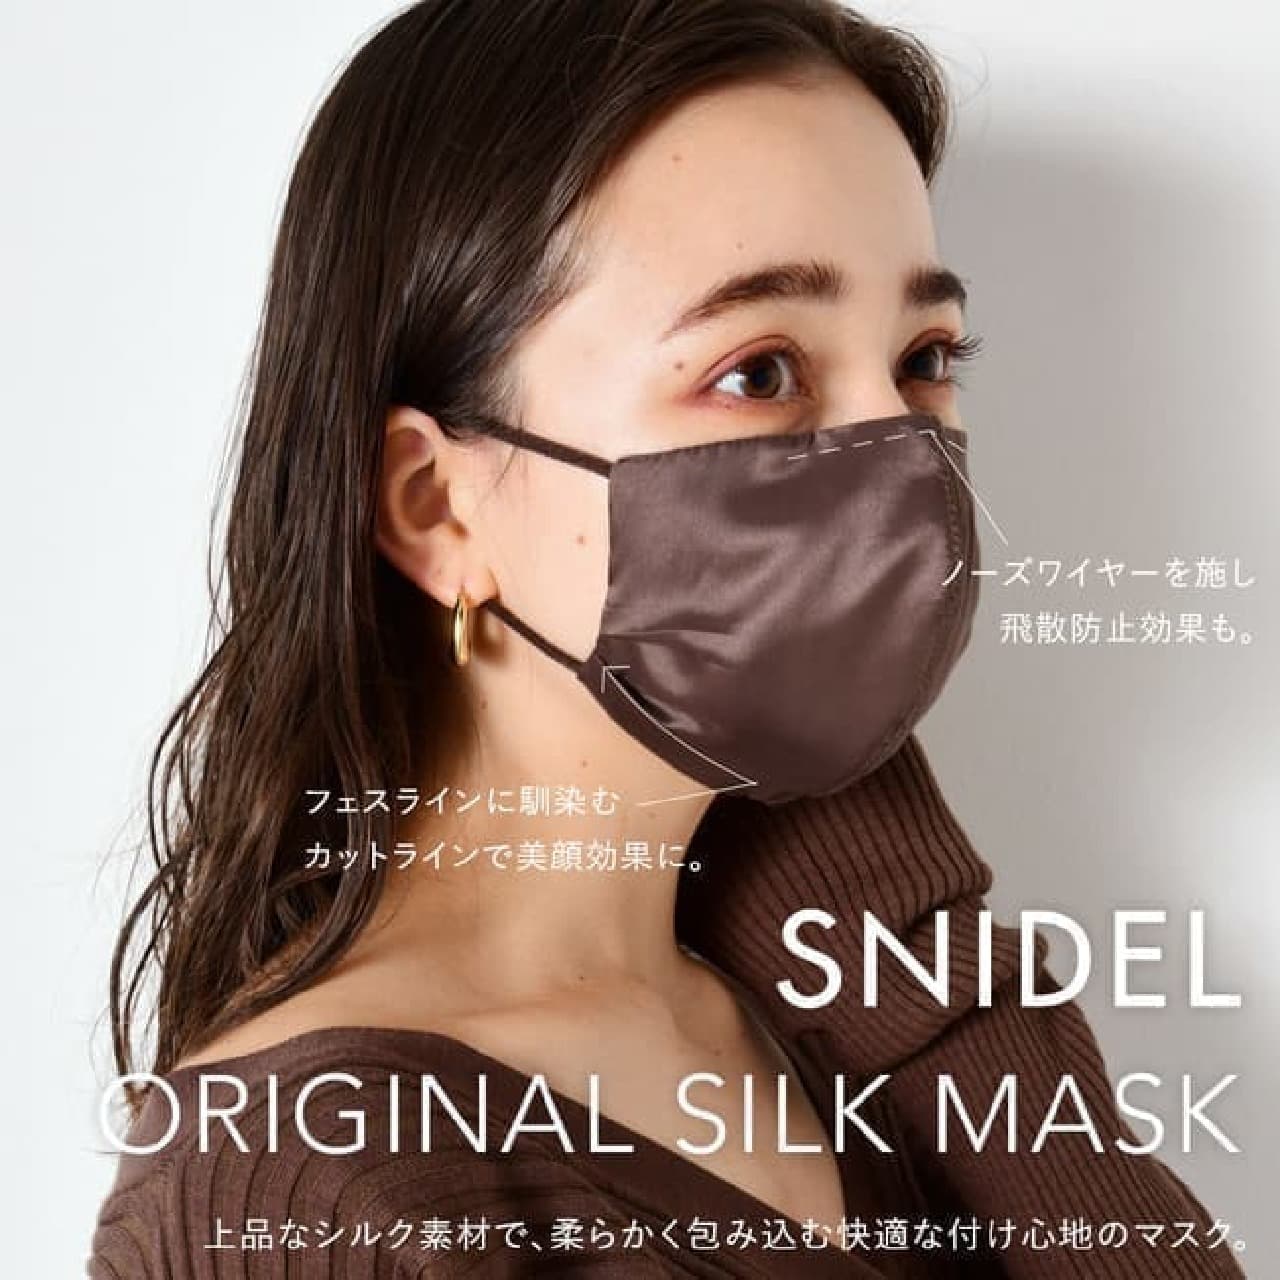 Comfortable with 100% silk ♪ "SNIDEL original silk mask" is available in limited quantities--Prevents scattering and has a facial effect